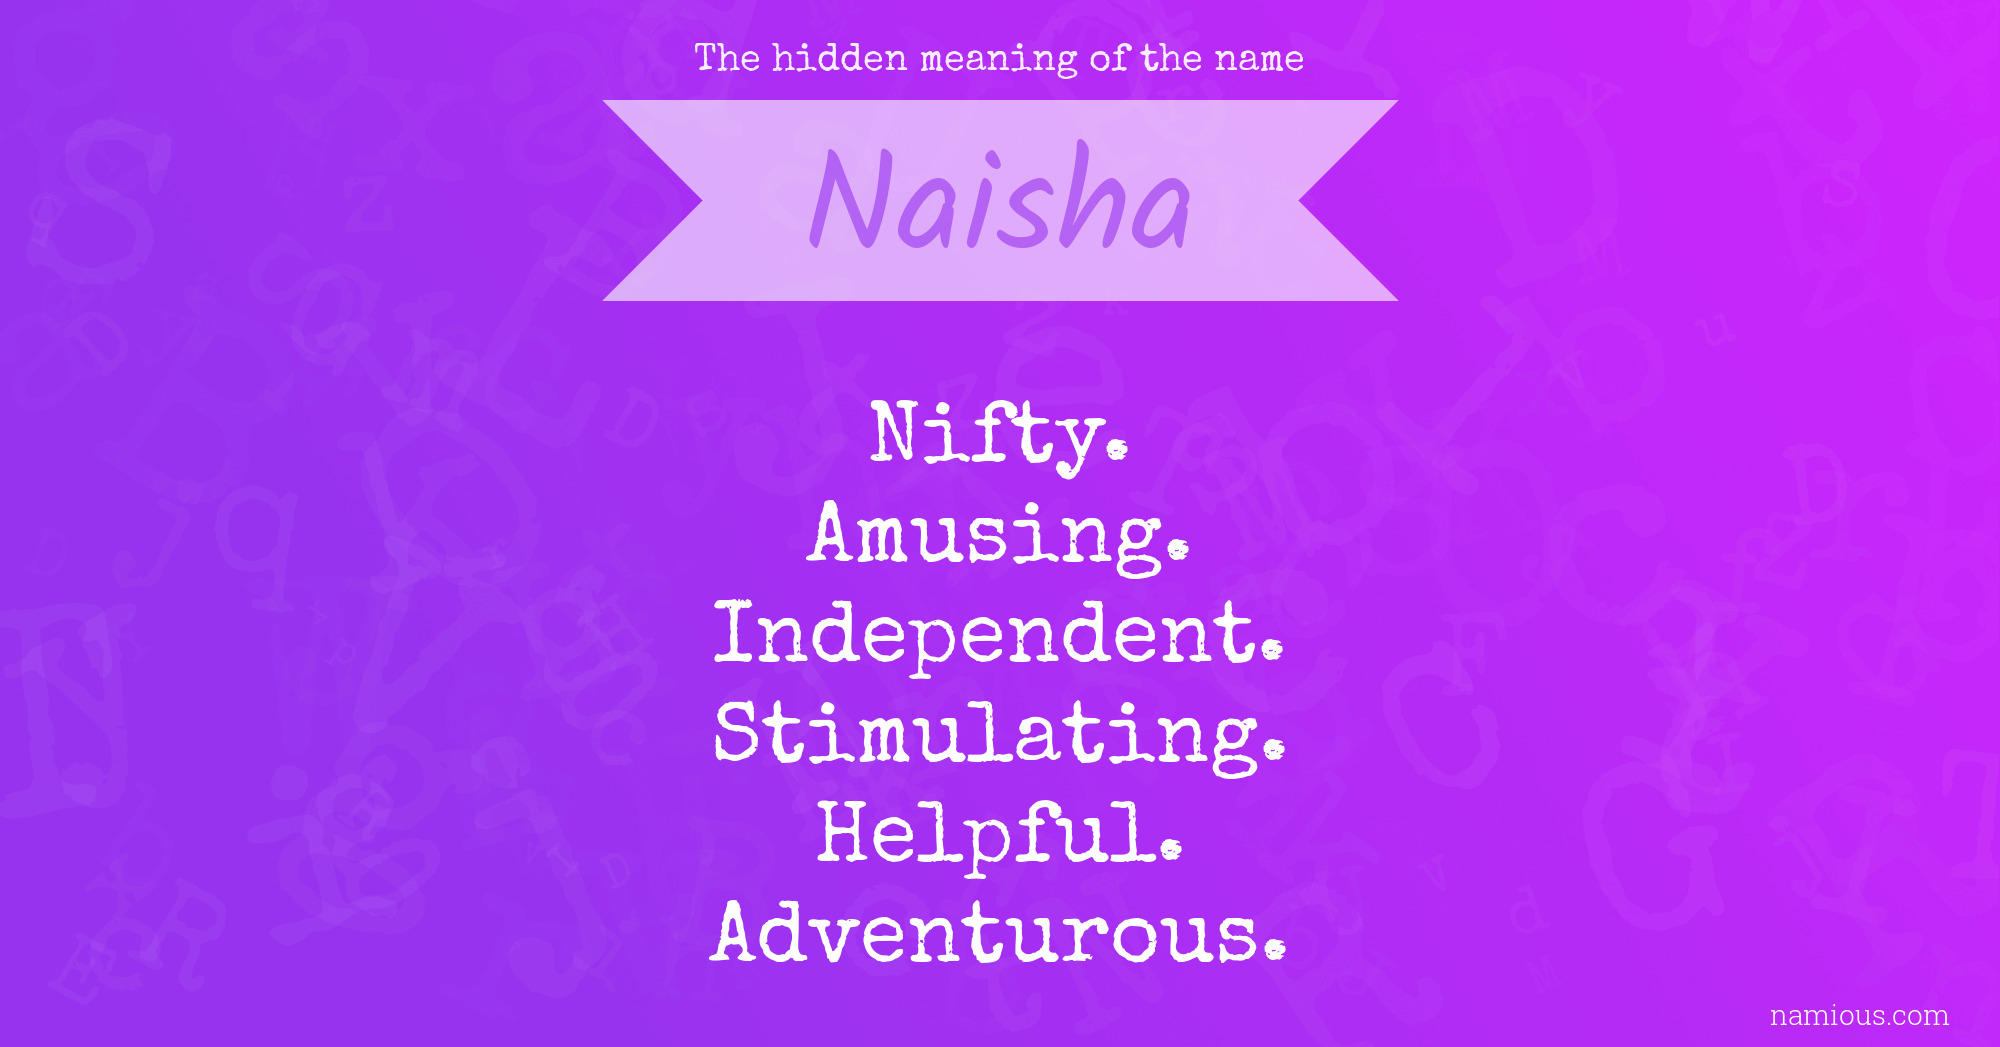 The hidden meaning of the name Naisha